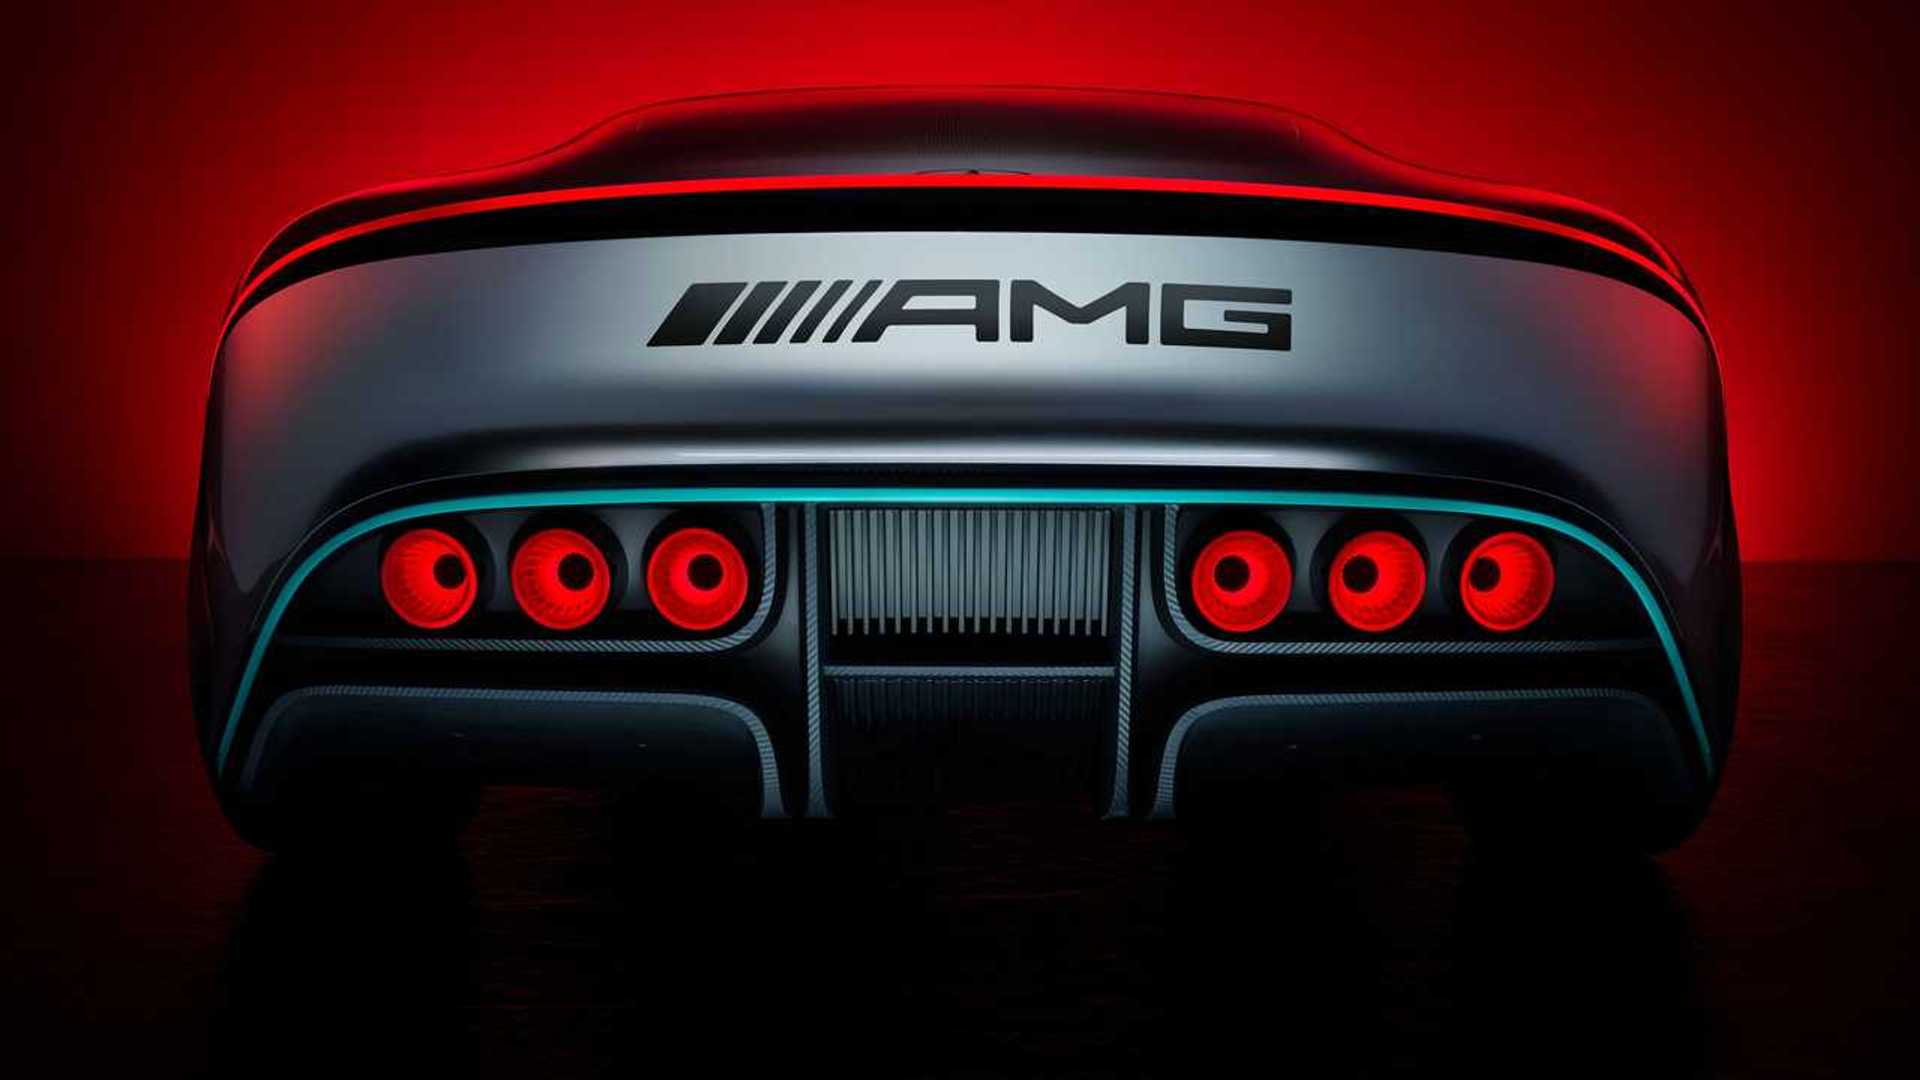 amg is making an electric super suv with 1,000+ hp: report